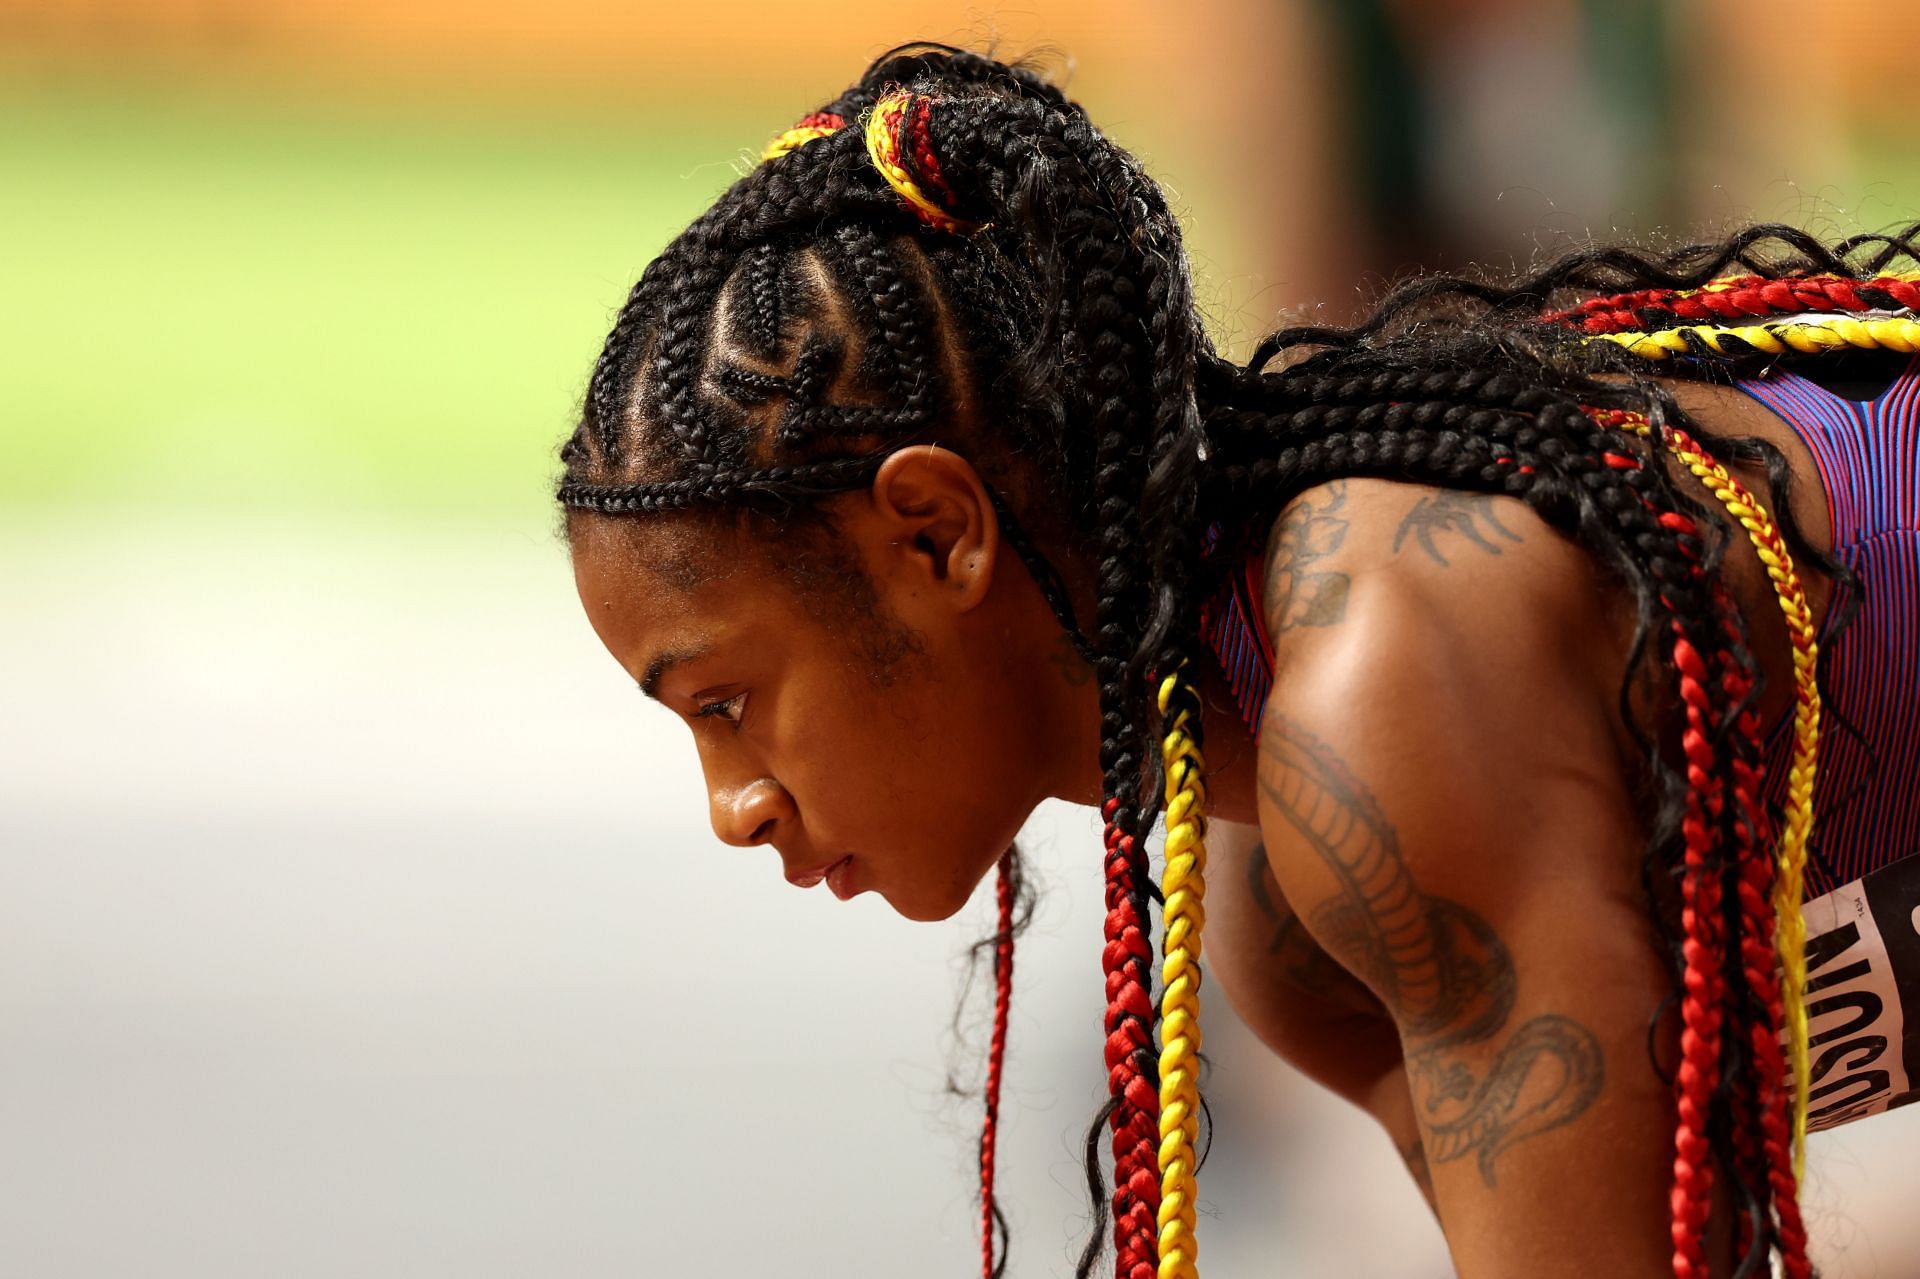 Sha&#039;Carri Richardson of Team United States looks on ahead of the Women&#039;s 200m Semi-Final during the 2023 World Athletics Championships at the National Athletics Centre in Budapest, Hungary.